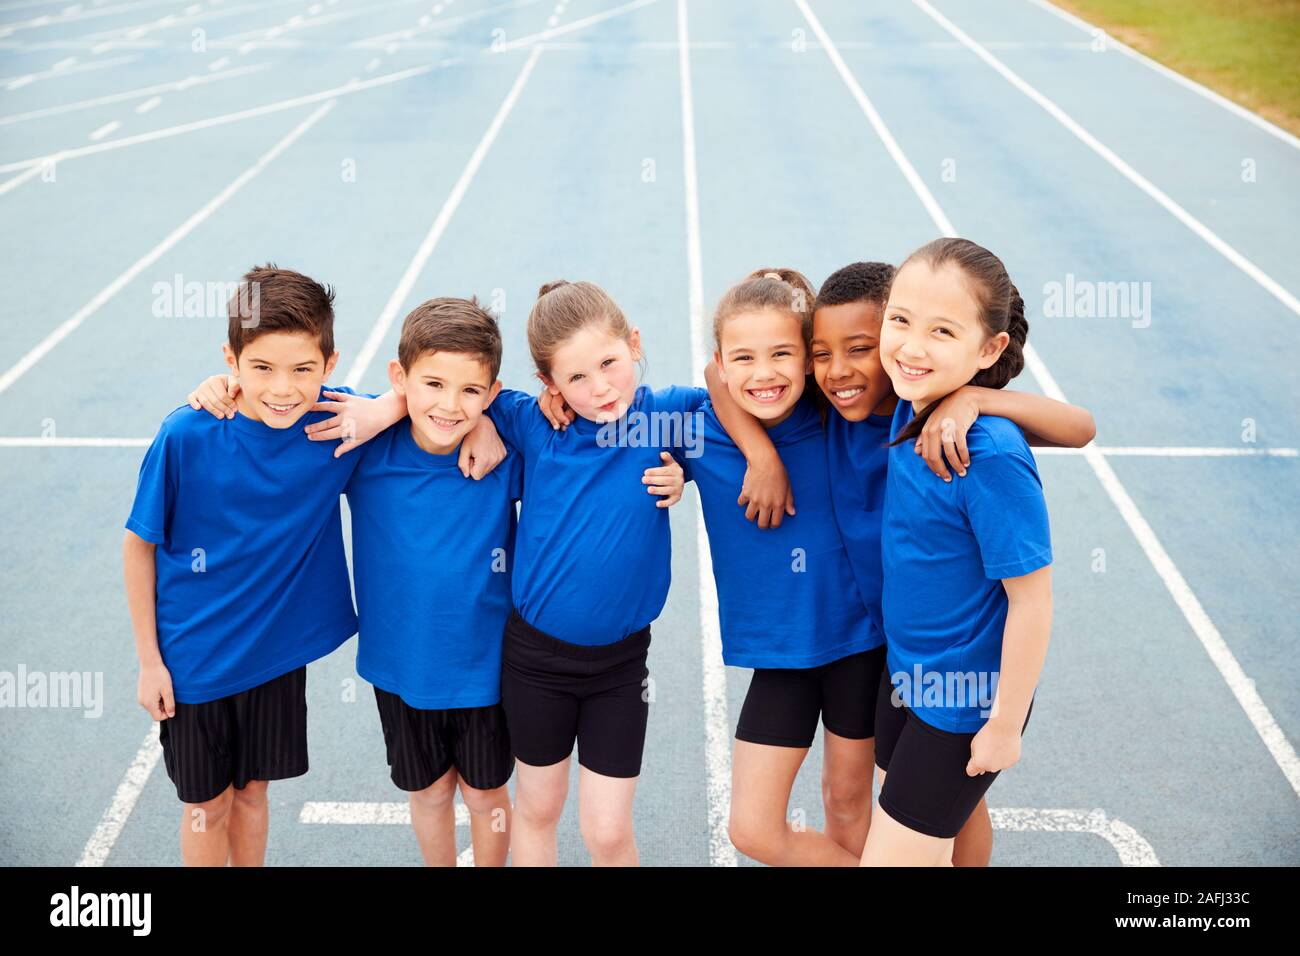 Portrait Of Children In Athletics Team On Track On Sports Day Stock Photo